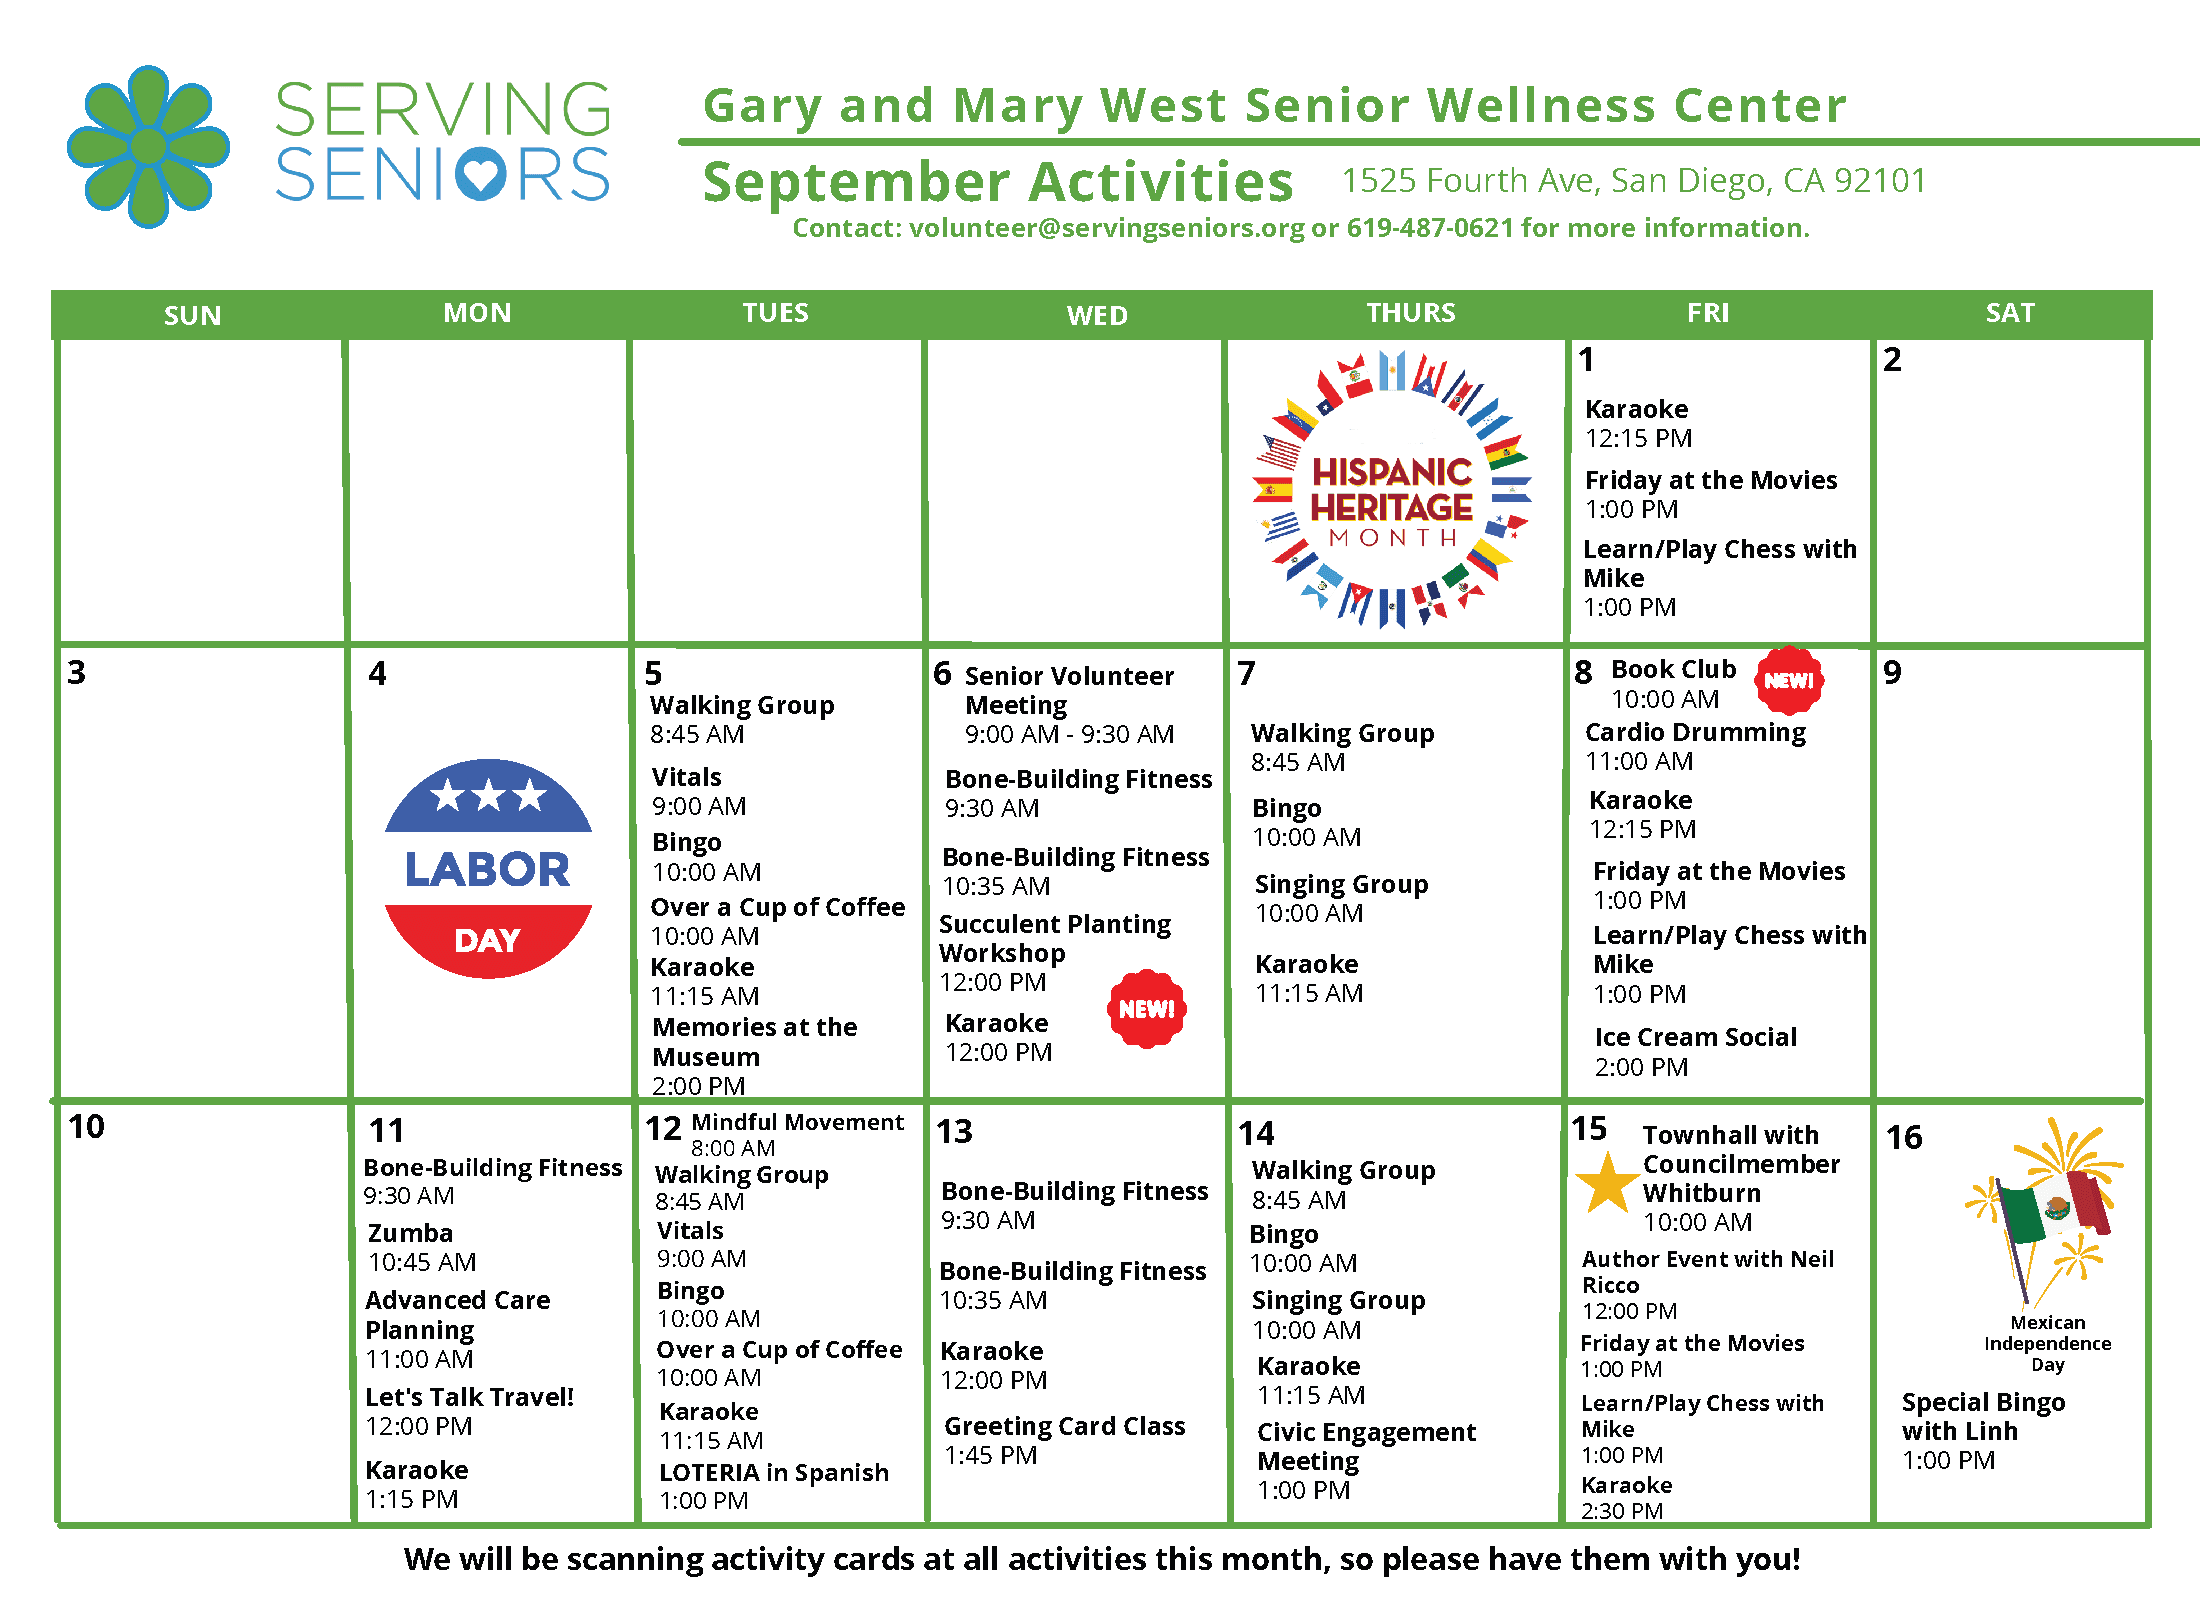 Click to download the Gary and Mary West Senior Wellness Center September Activities Calendar